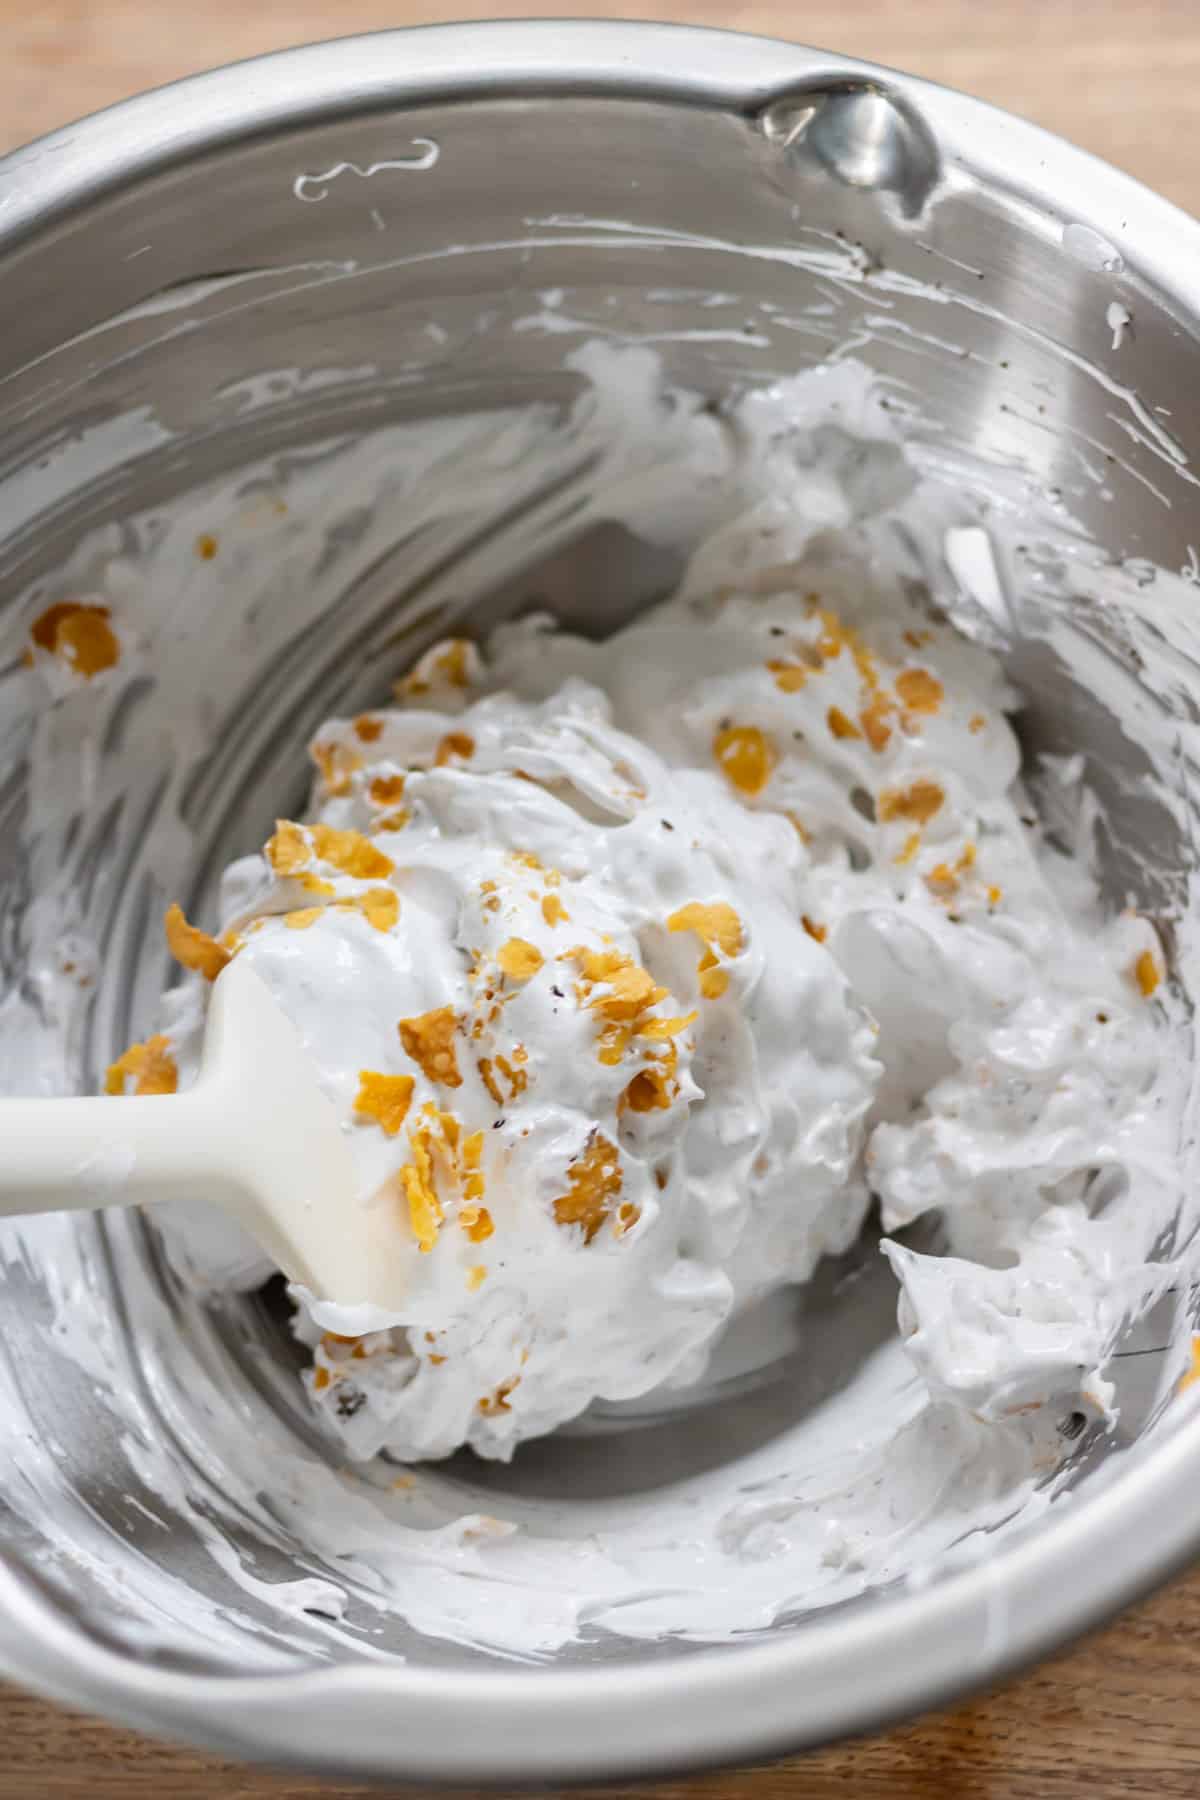 Mixing the cornflakes and chocolate into the meringue.